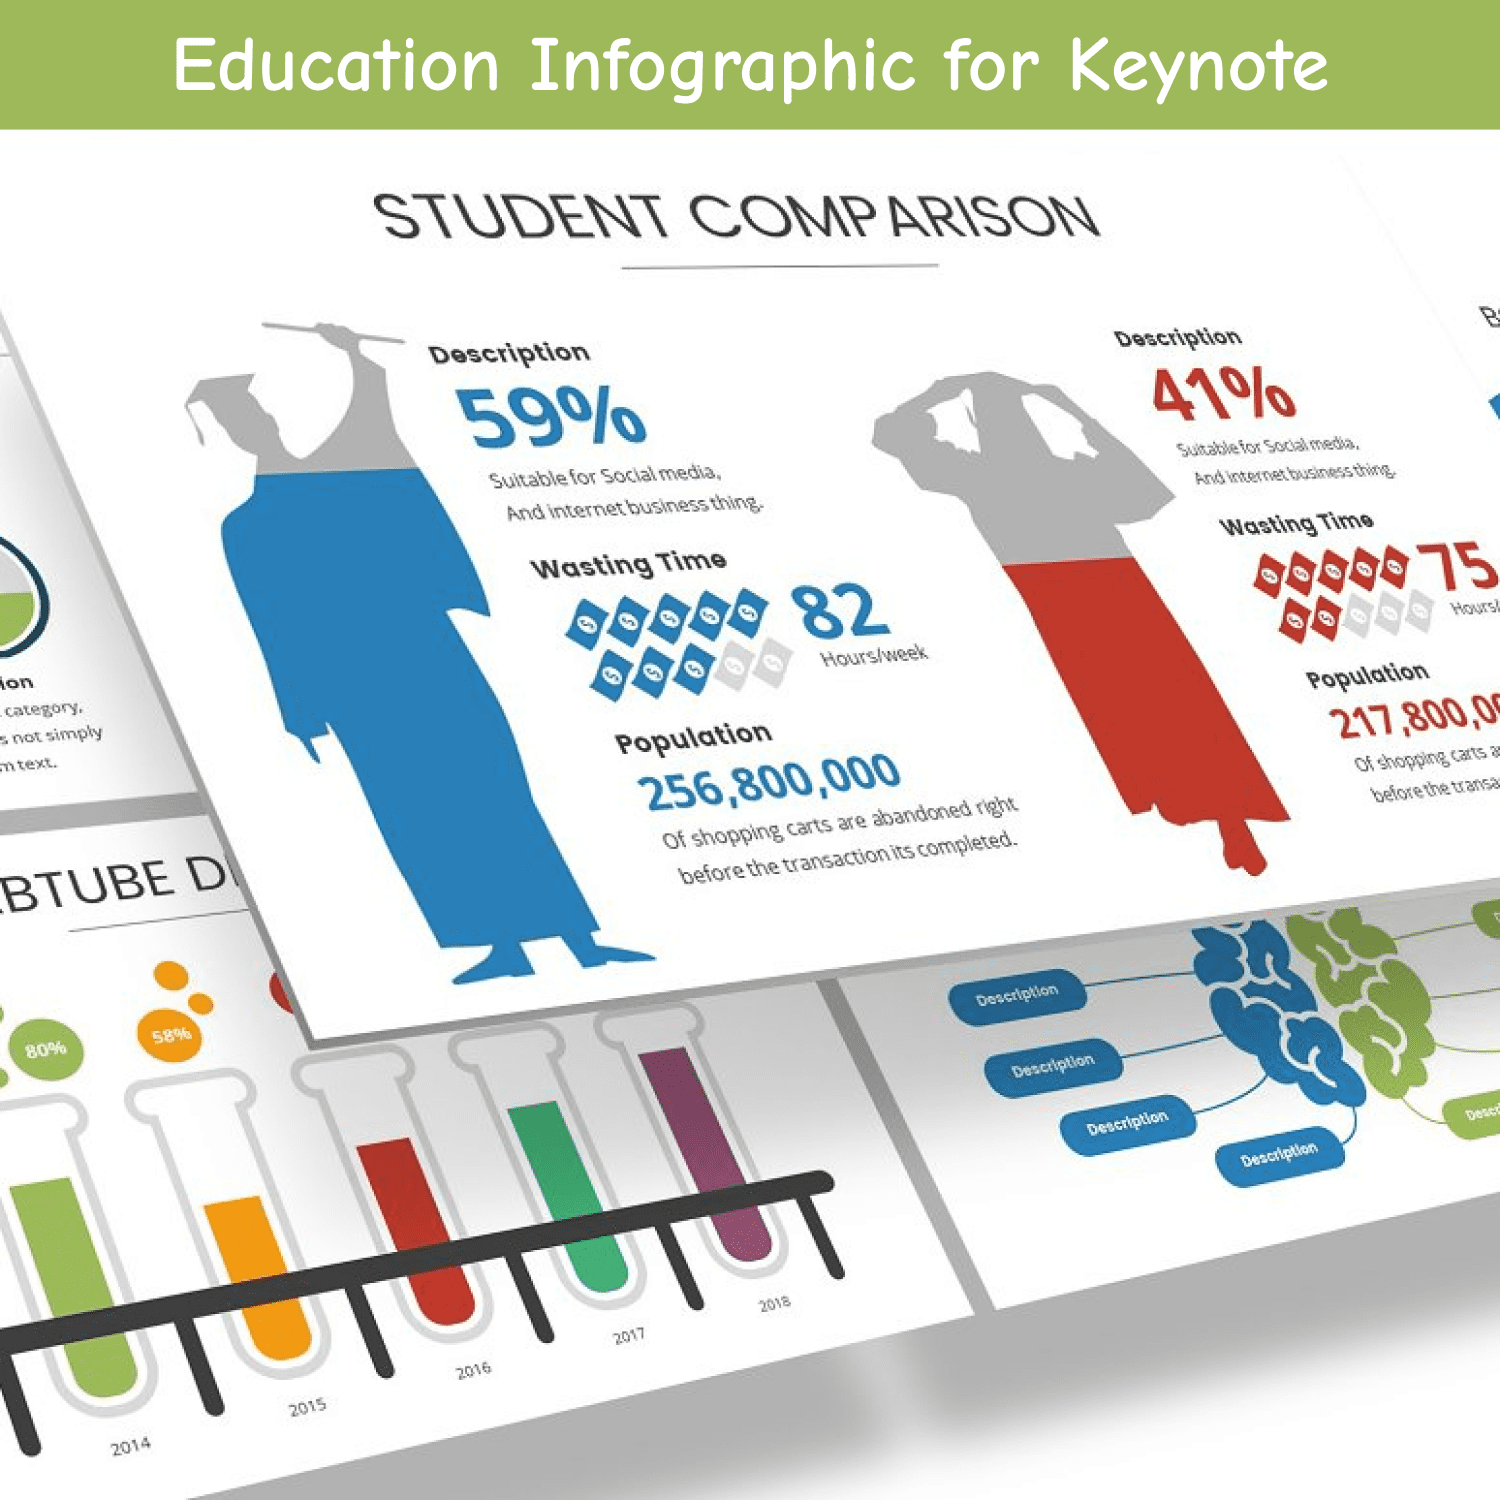 Education Infographic for Keynote.